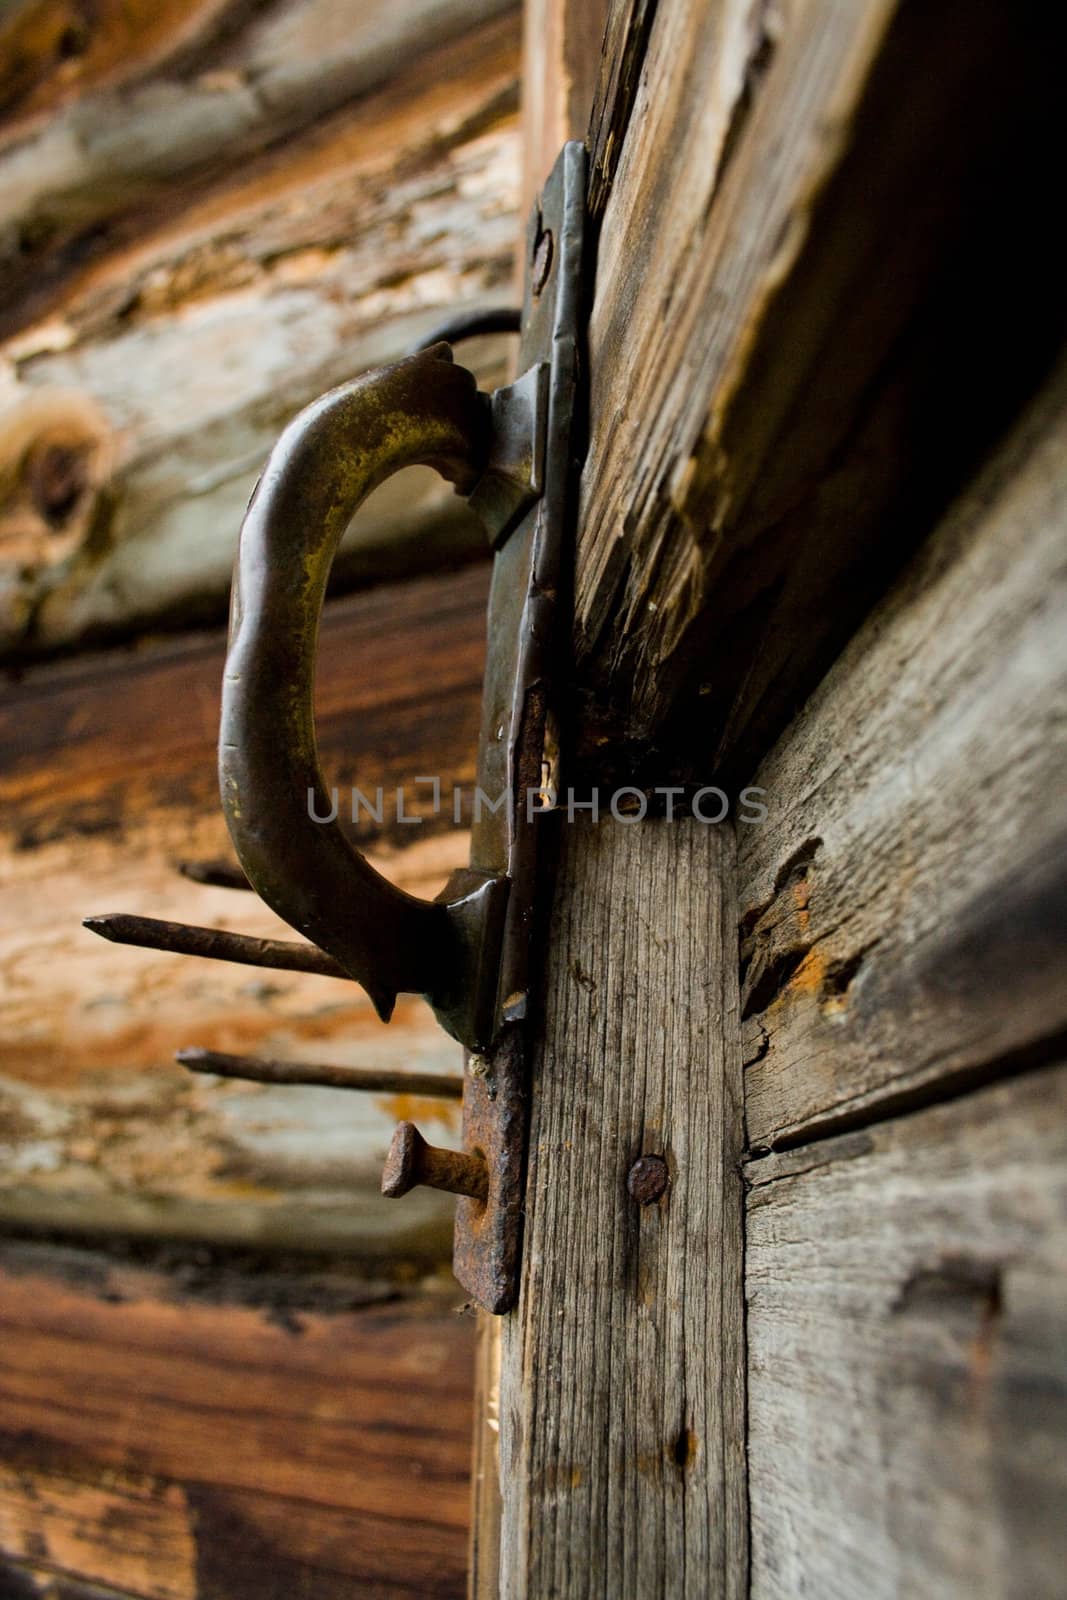 Old rusty doorknob with lots of texture nailed to the cracked wooden 
door.